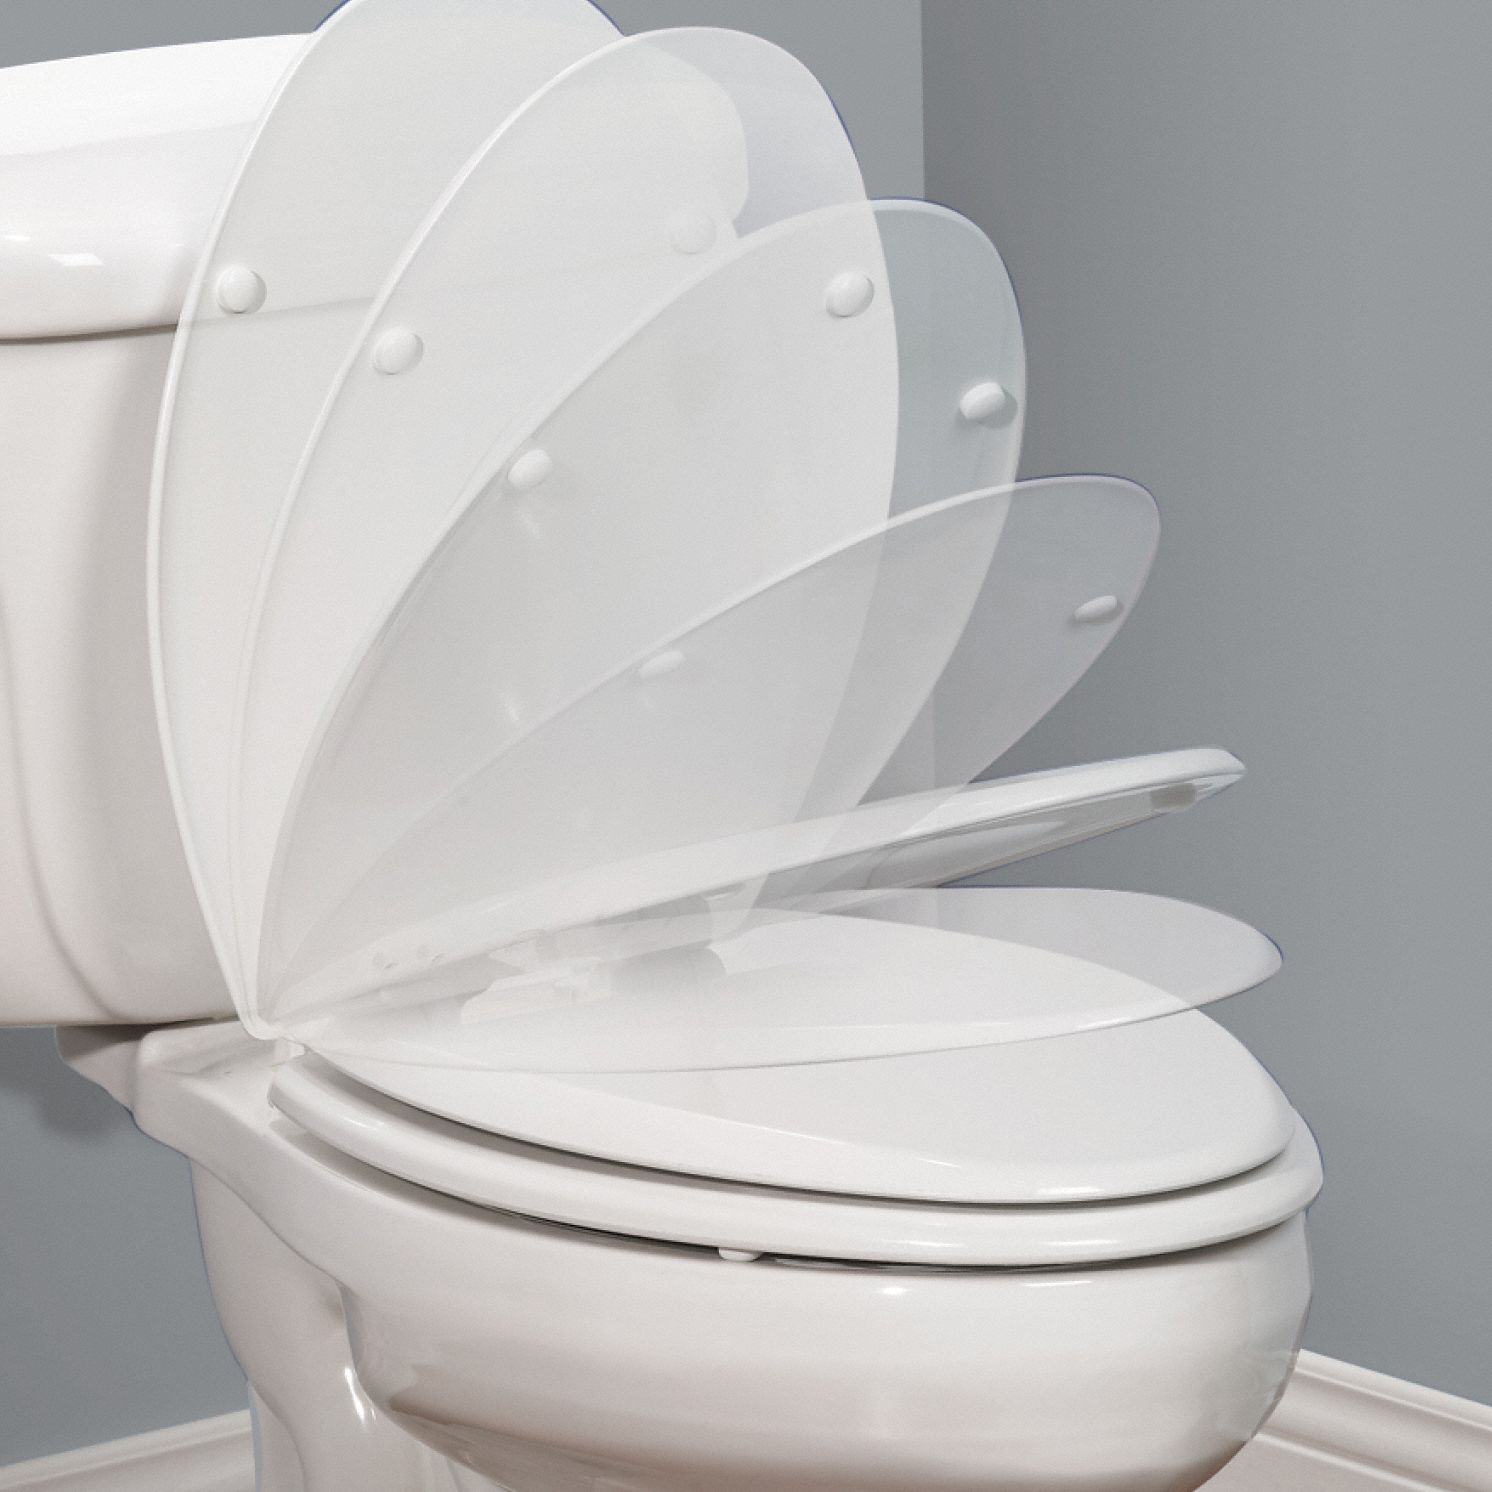 Slim Line with automatic closing and removable Details about   Toilet seat fits Ideal Standard Nobl k und abnehmbar data-mtsrclang=en-US href=# onclick=return false; 							show original title 